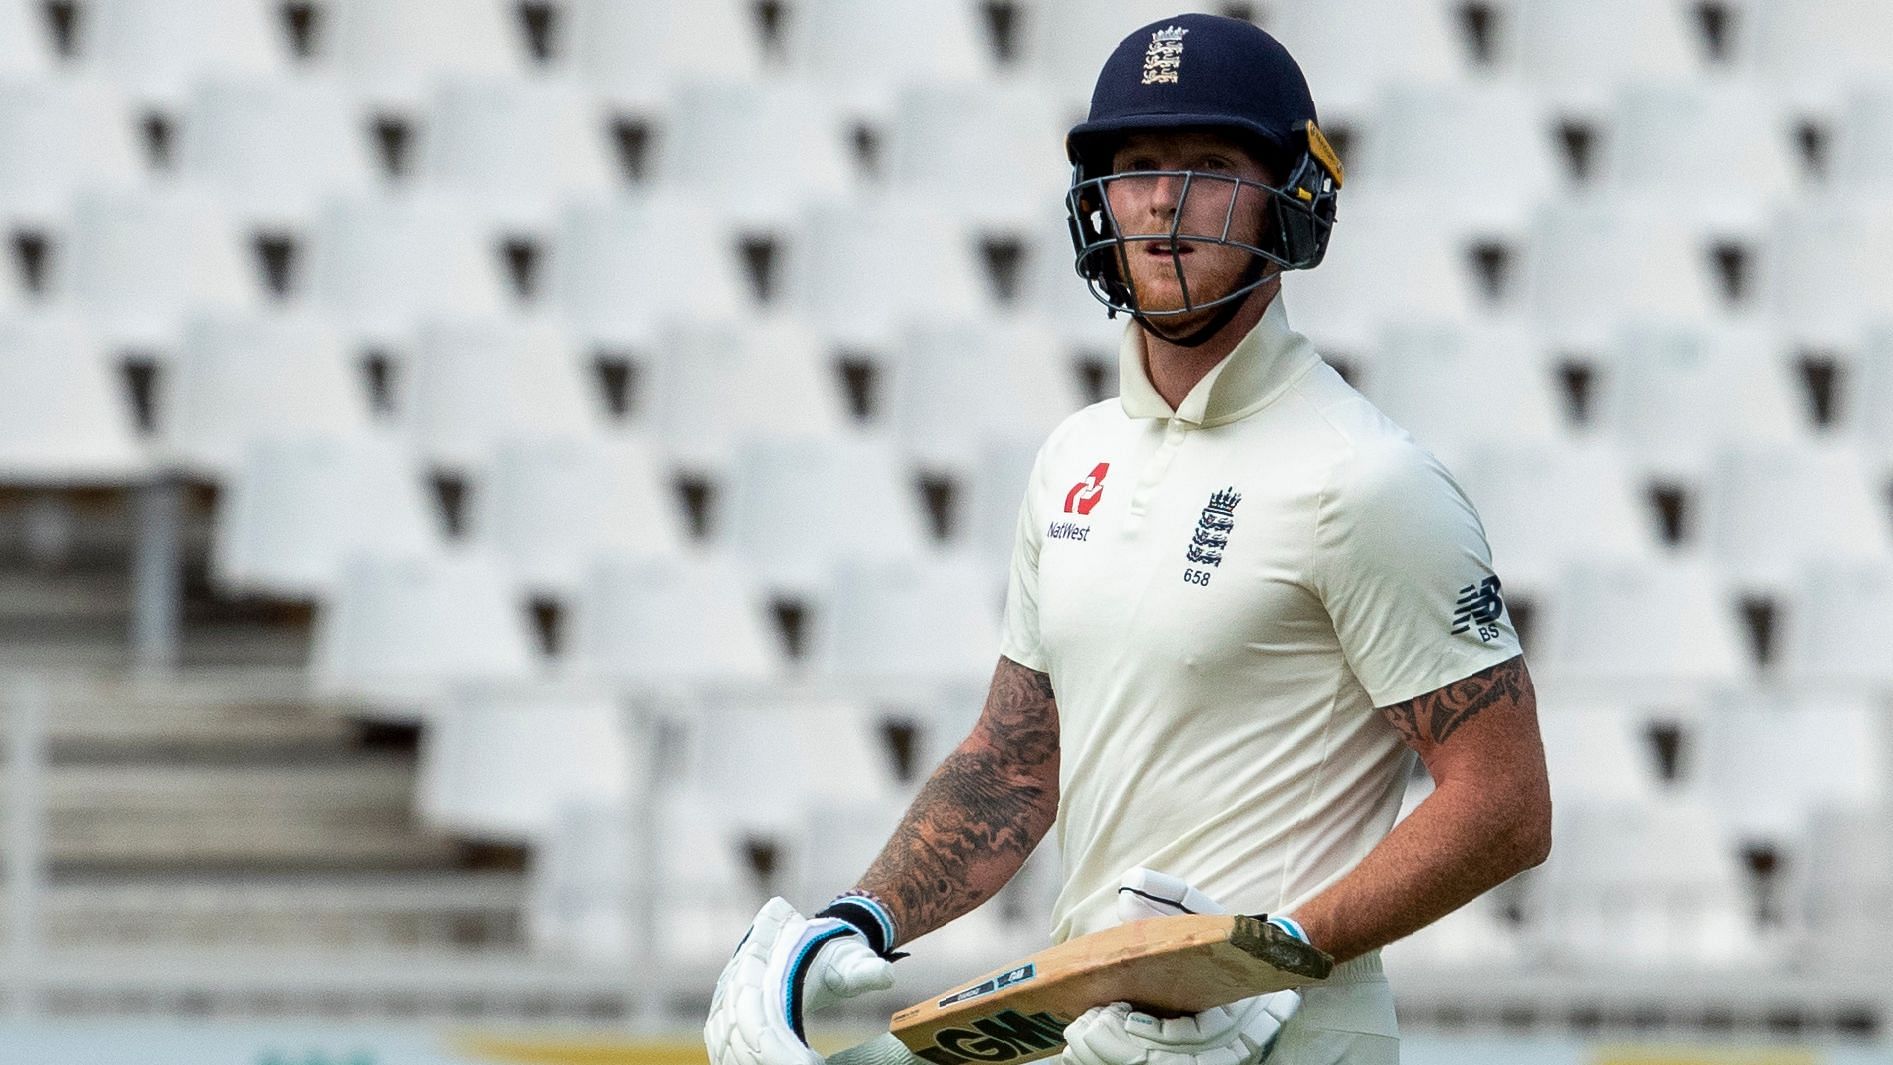 Star England all-rounder Ben Stokes has apologized for swearing at a cricket fan while leaving the field after being dismissed on the opening day of the series-deciding final test against South Africa on Friday, 24 January.